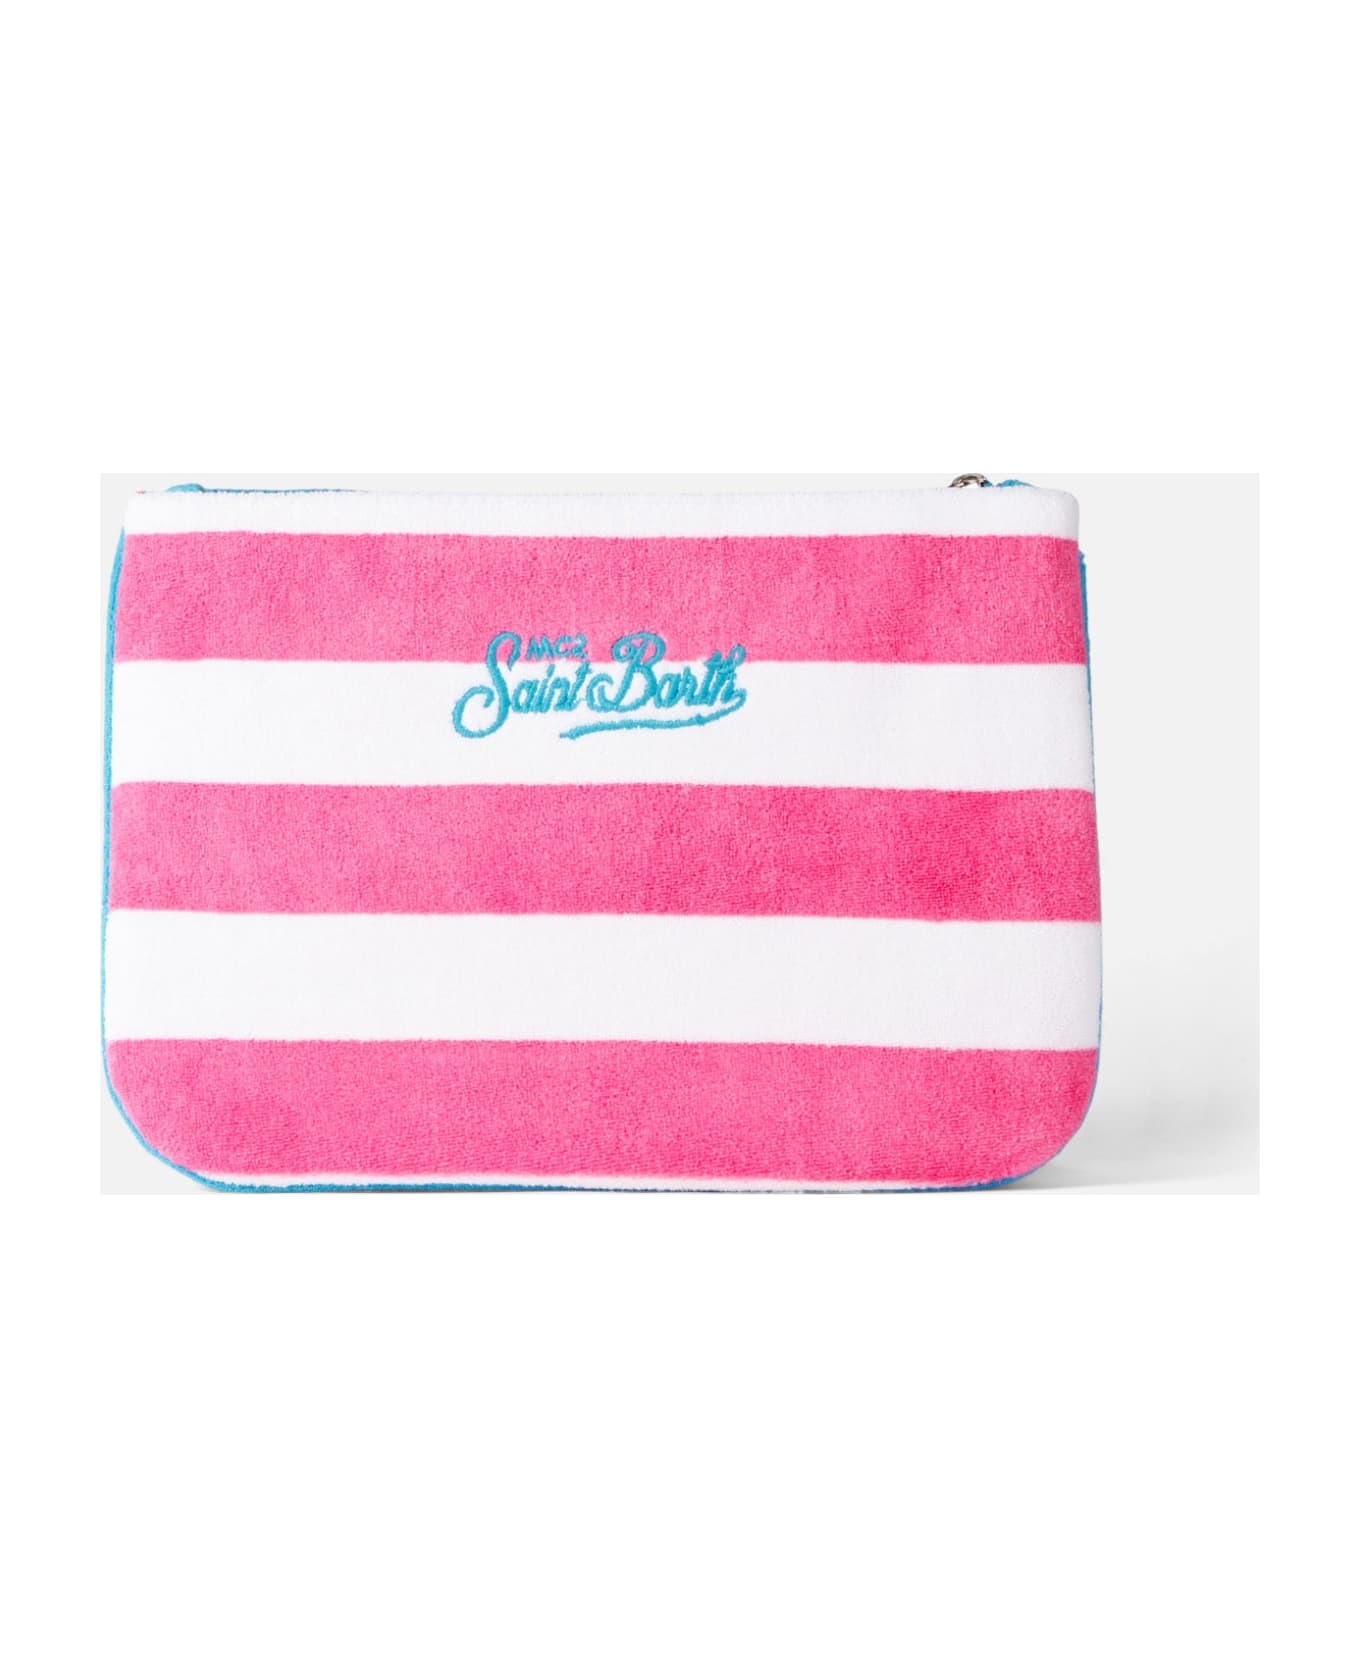 MC2 Saint Barth Parisienne Terry Pochette With White And Fuchsia Stripes - PINK クラッチバッグ